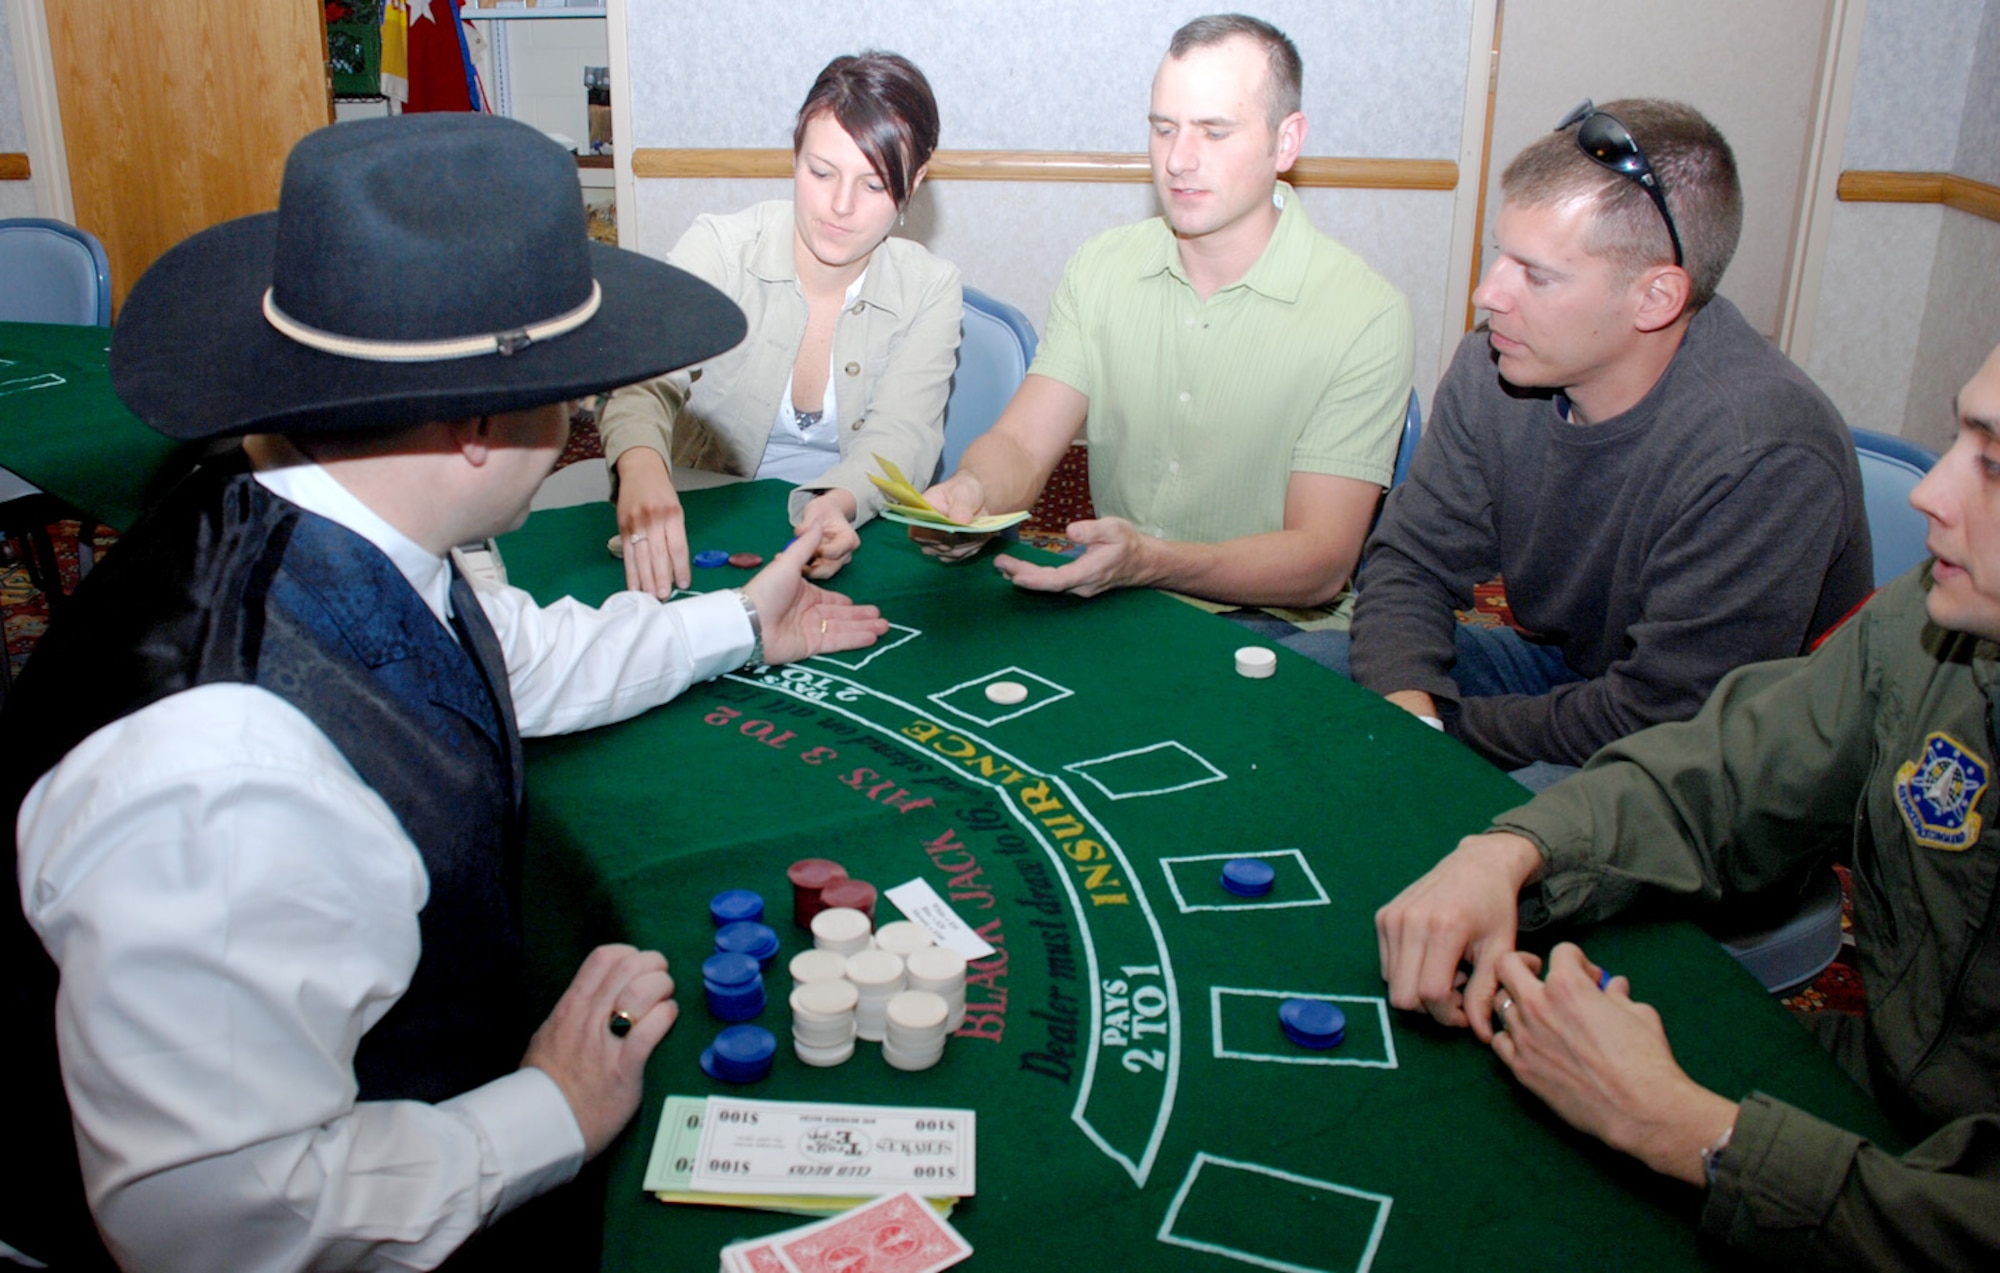 Participants of the party play a game at Casino Night Feb. 8. The chips were used as fake money.